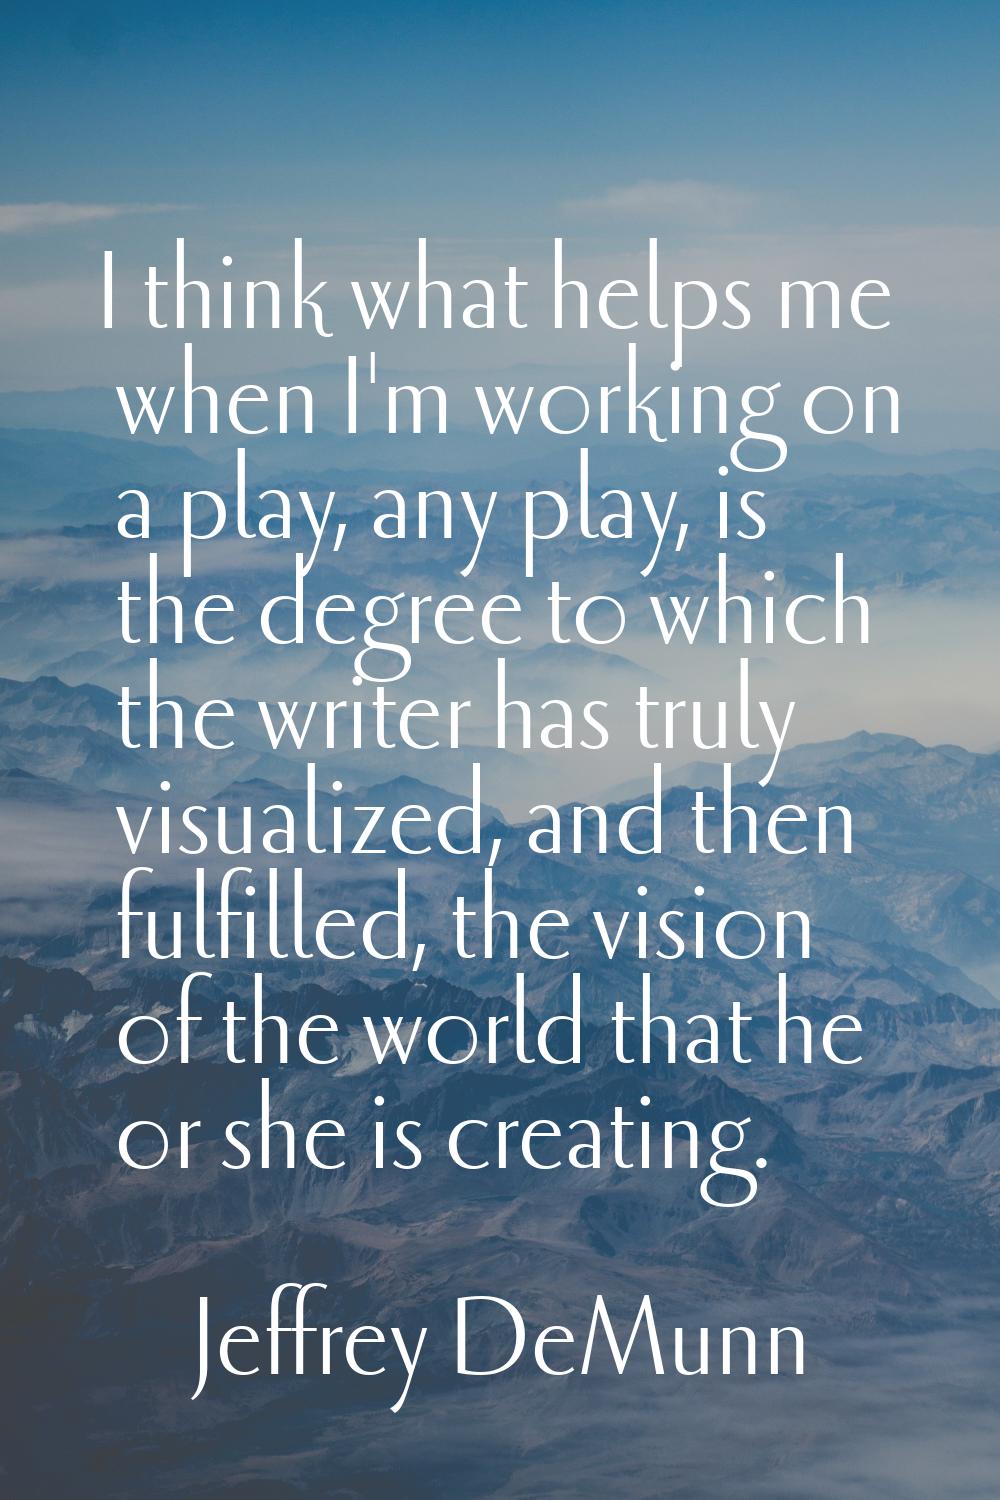 I think what helps me when I'm working on a play, any play, is the degree to which the writer has t